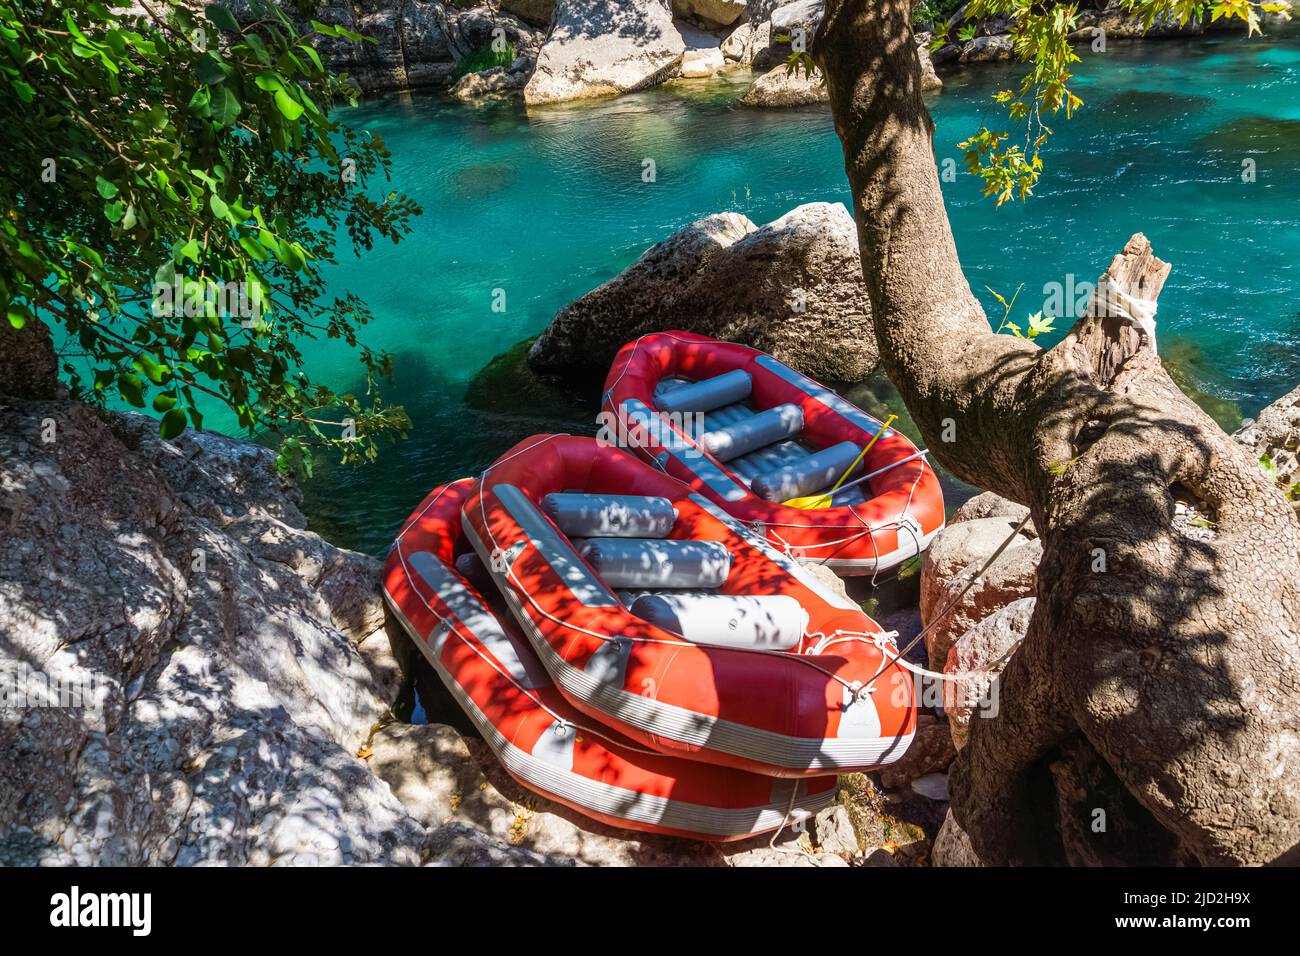 Rafting boats near Koprucay river in Manavgat, Antalya. Rafting and outdoor concept. Stock Photo